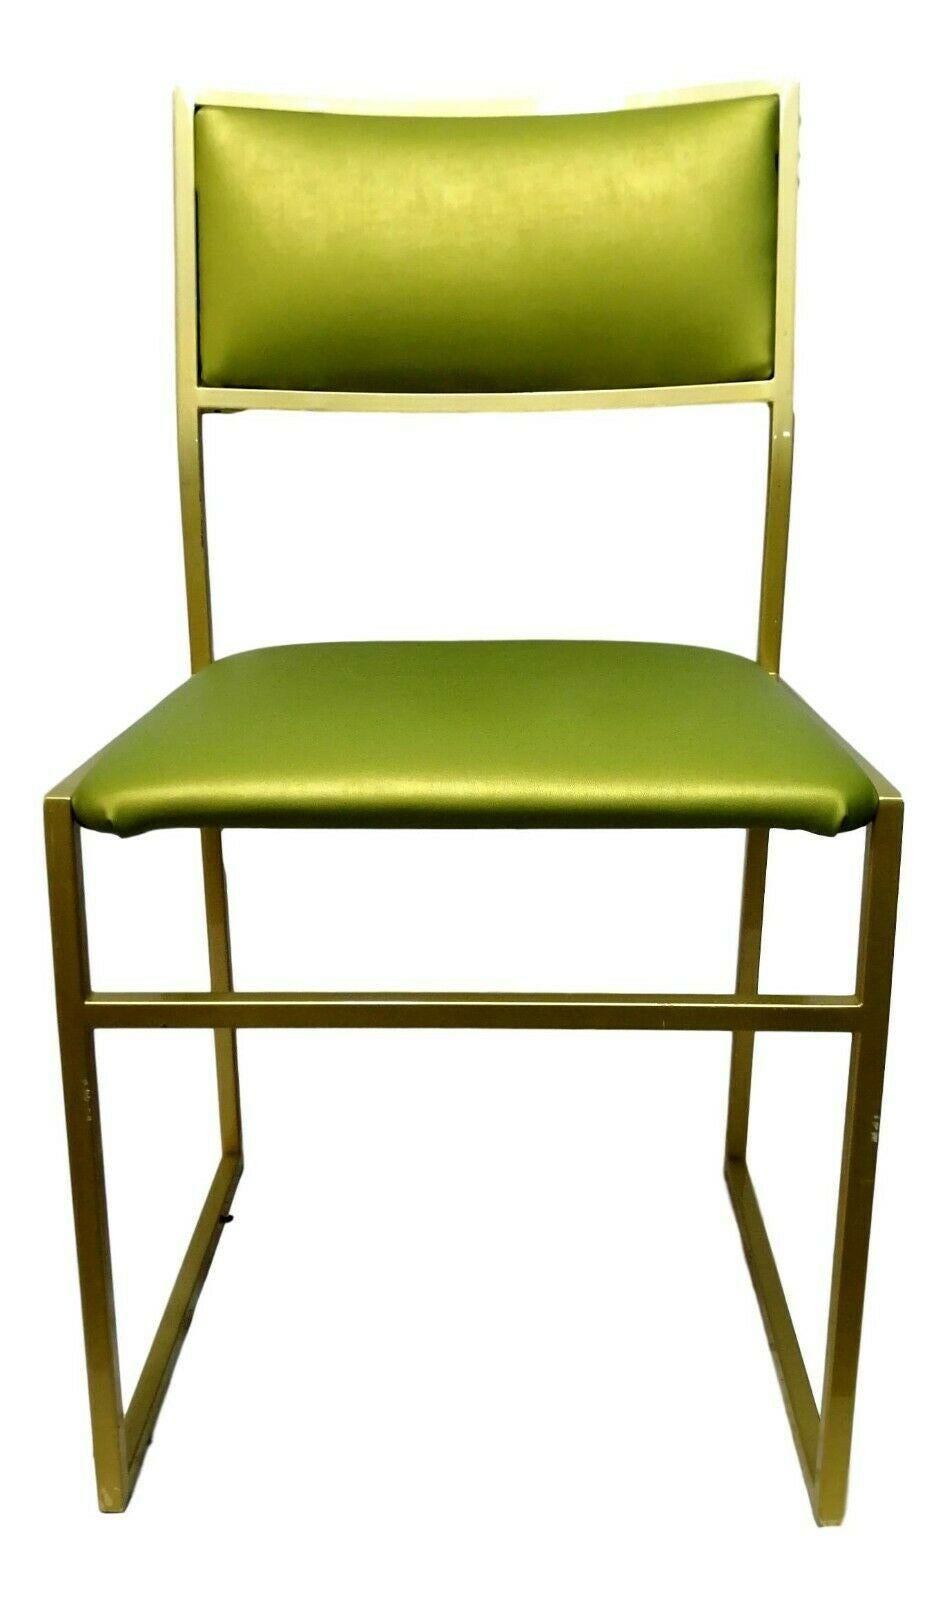 Lot of Six Collectible Coloured Chairs in Gold Metal, 1970s For Sale 5